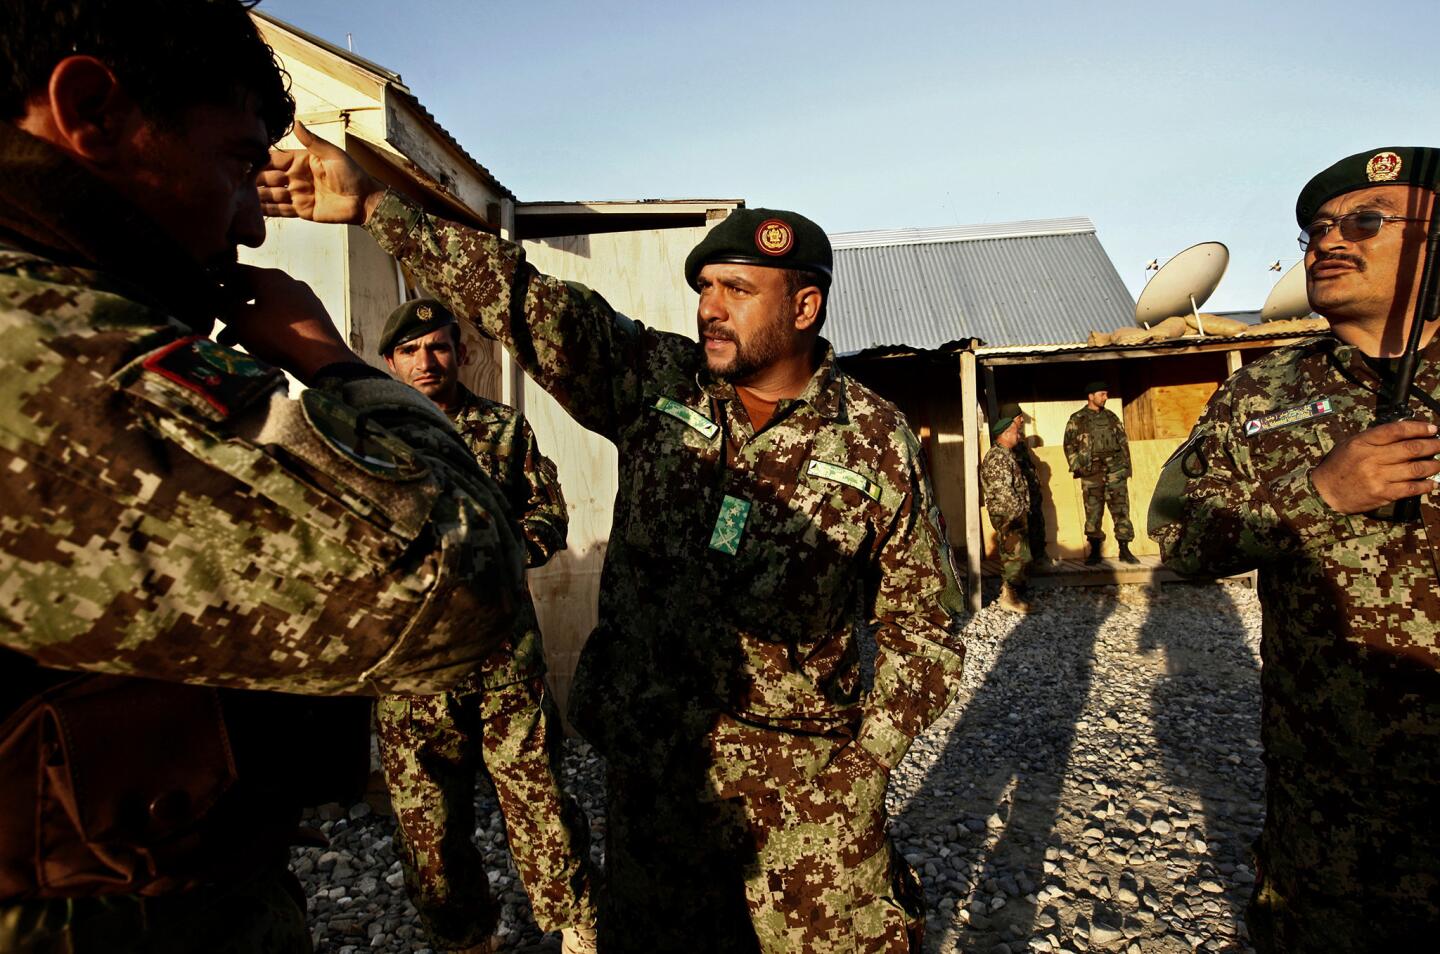 Afghan Army Lt. Col. Kohadamani Hamidullah gives orders before a mission to look for Taliban weapon supplies outside the town of Maidan Shahr.